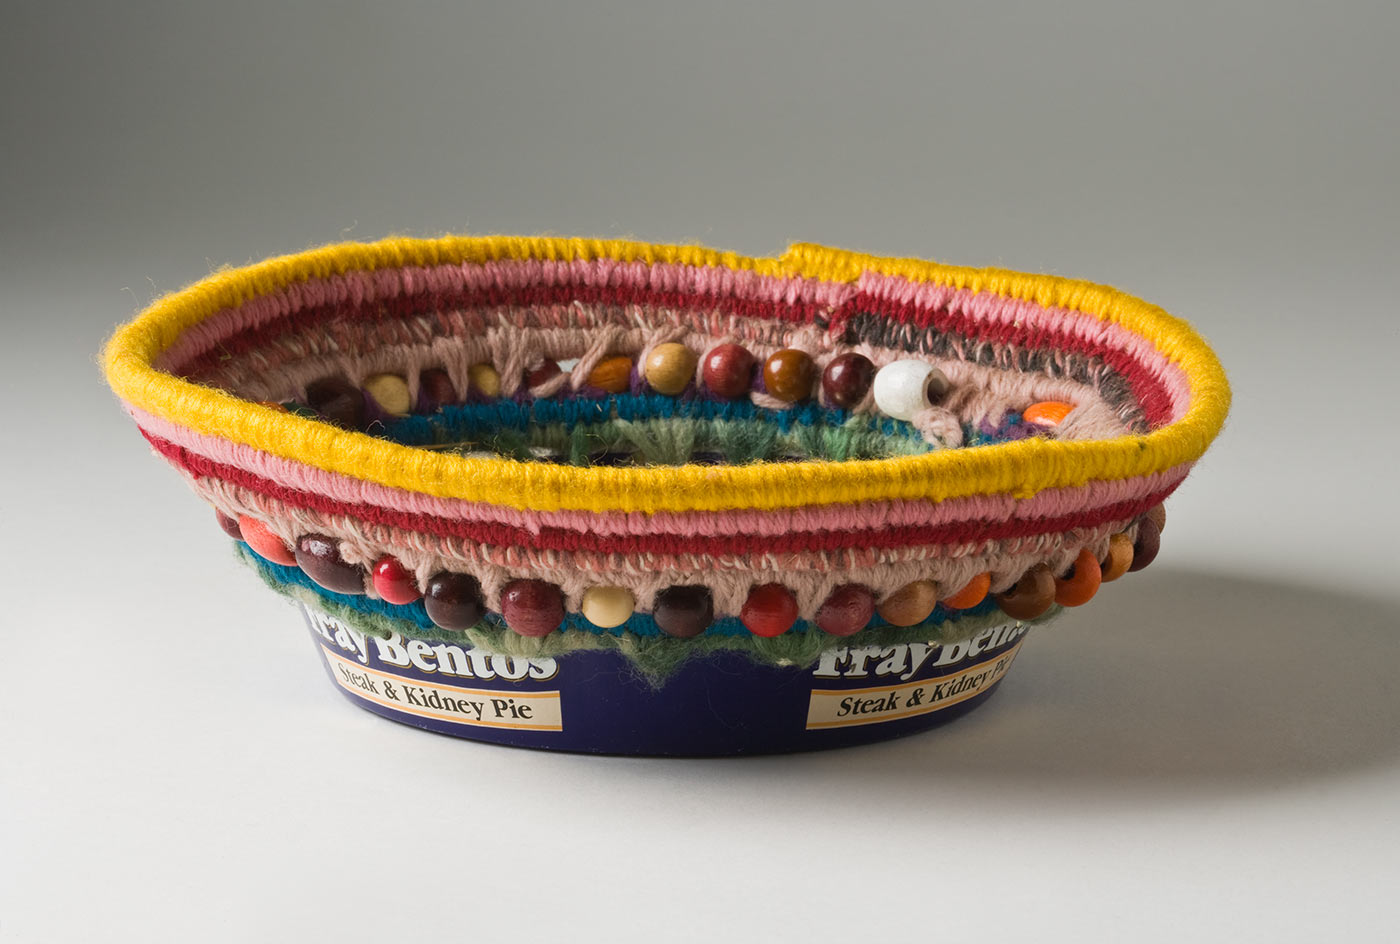 A circular coiled striped yarn basket over plant fibre with bead decoration, which opens out towards the top and has a metal base. The base of the basket is a blue and white coloured metal tin with burn marks to the bottom which includes the text 'Fray Bentos / Steak and Kidney Pie'. Yarn is used to attach the base to the top section through holes that have been punched in the tin. The basket has a stripe of yellow at the top edge followed by pink, dark pink, brown and mid pink, peach, teal and light green. Multicoloured oval and round wood beads are attached within the yarn coils at the top of the metal base. - click to view larger image